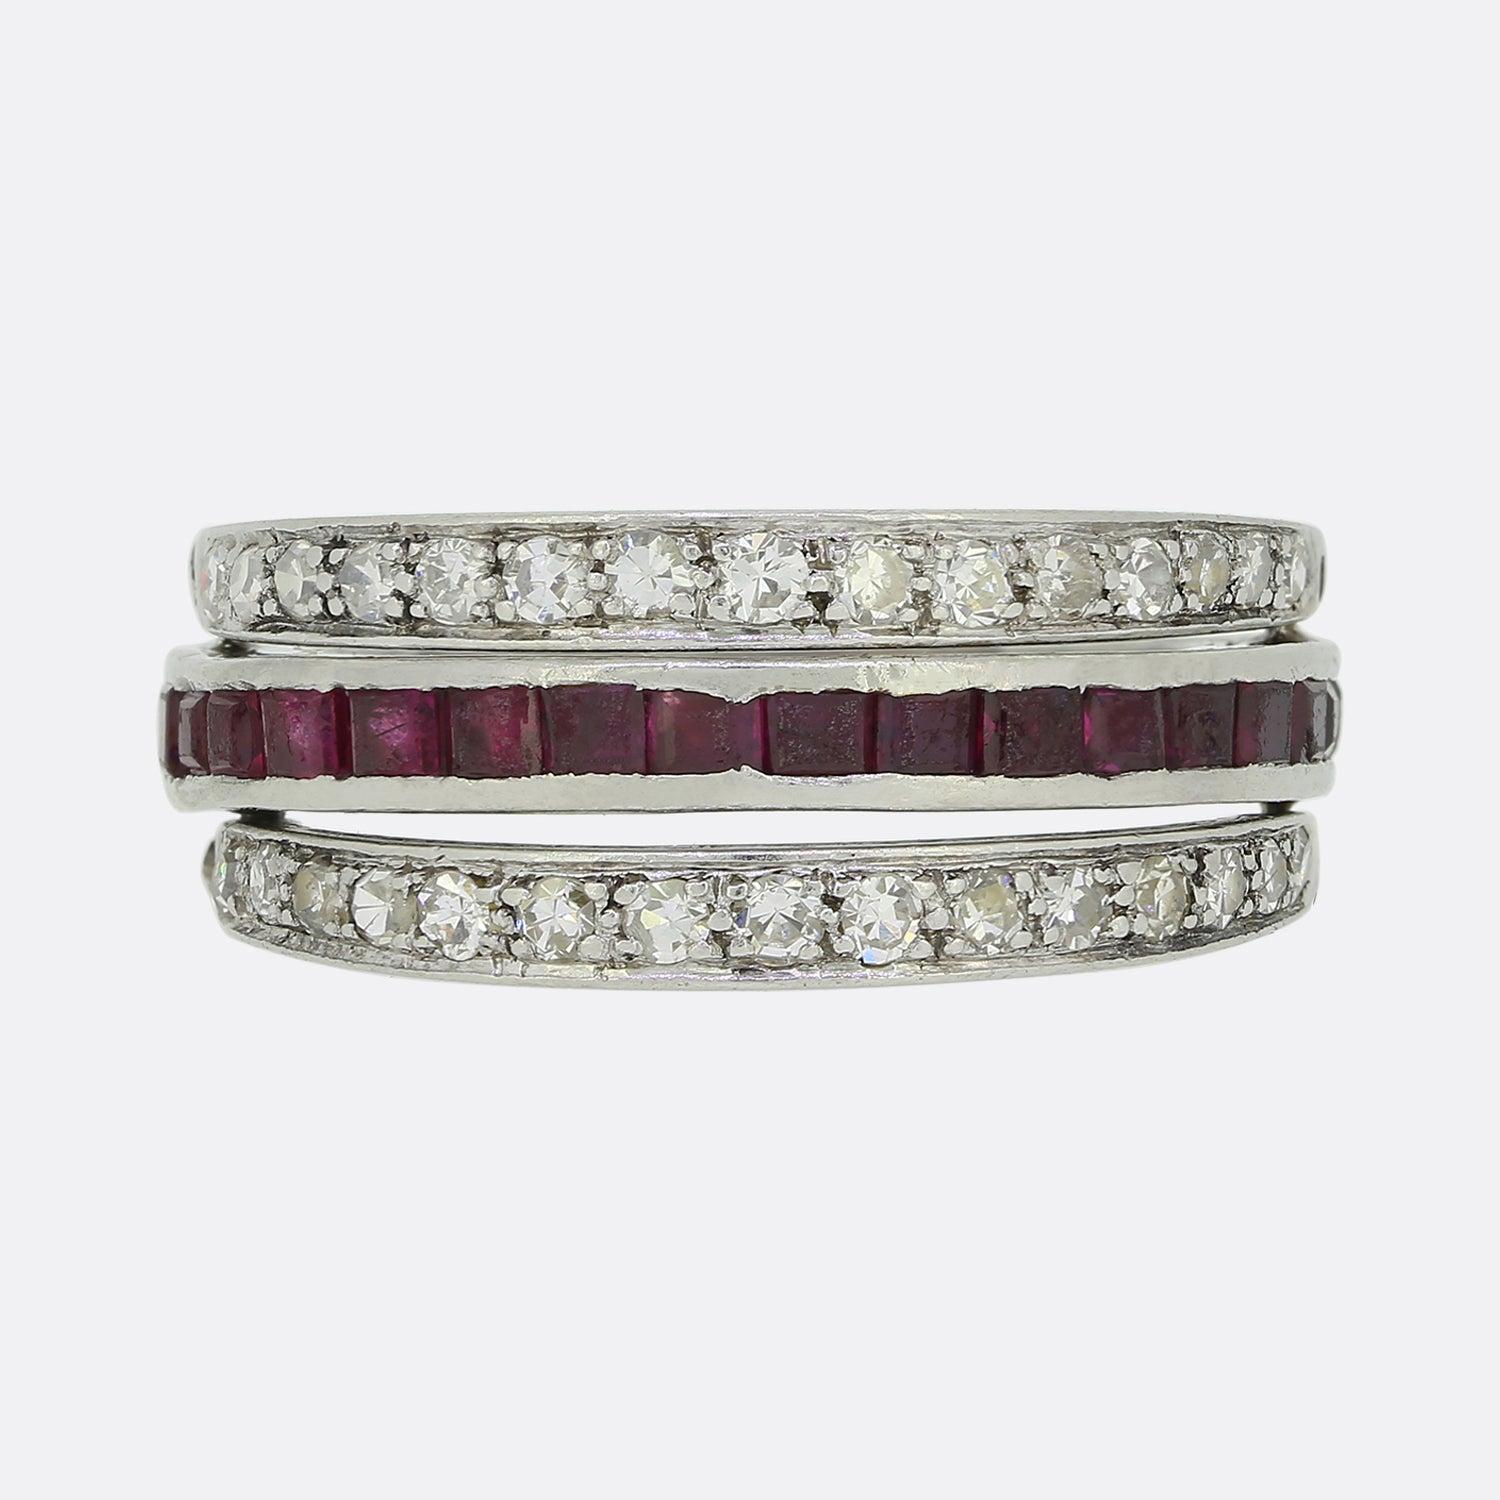 This is a wonderful Art Deco sapphire, ruby and diamond flip ring. This piece offers two rings in one allowing the wearer to flip the single cut set diamond sides round to either a sapphire or the ruby mid section. The ring was crafted during the